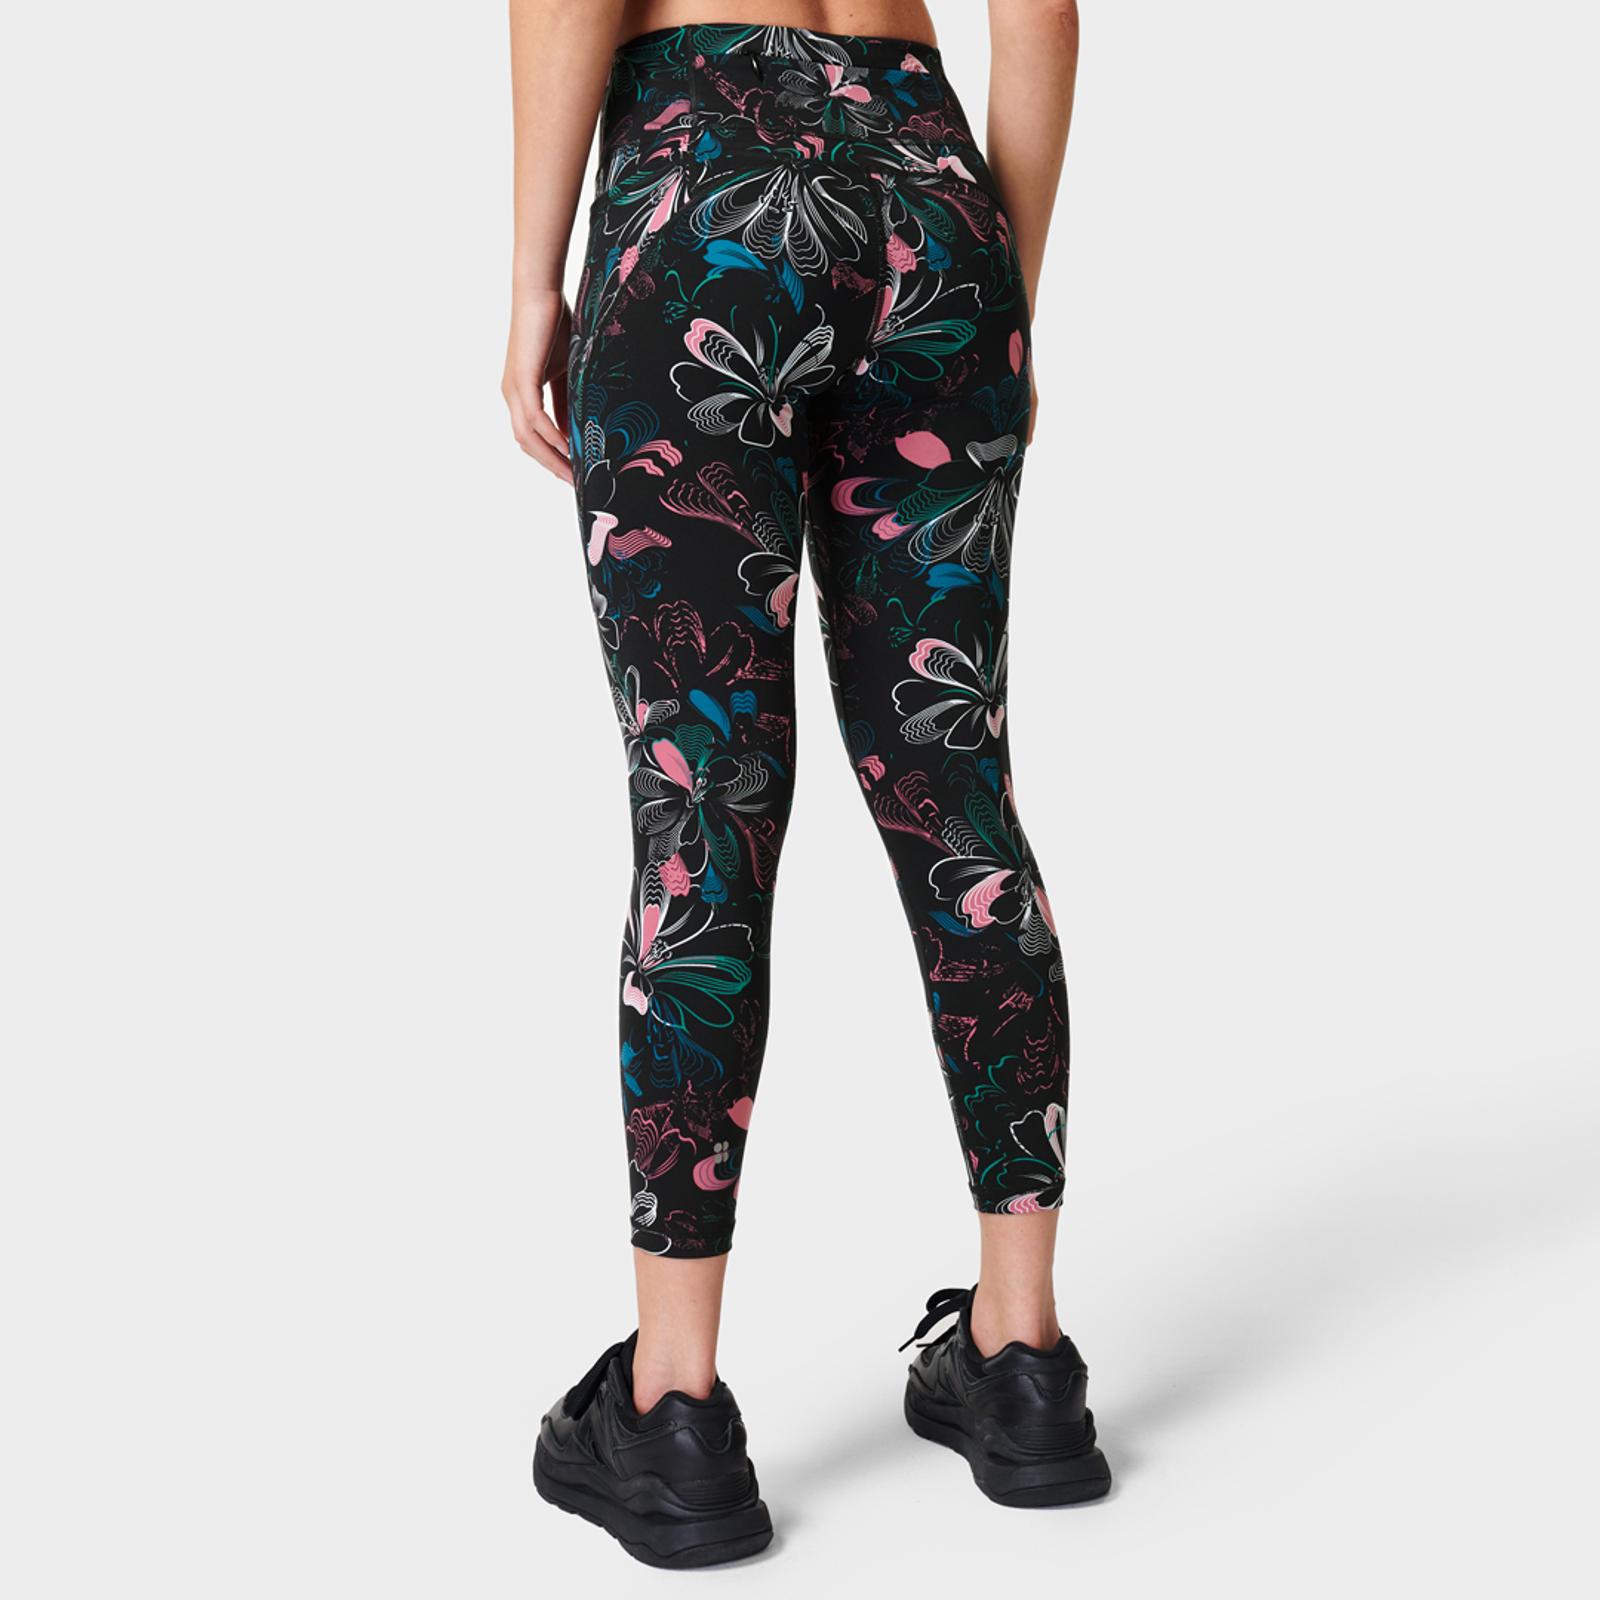 Power 7/8 Workout Leggings - Pink Arched Floral Print - BrandAlley